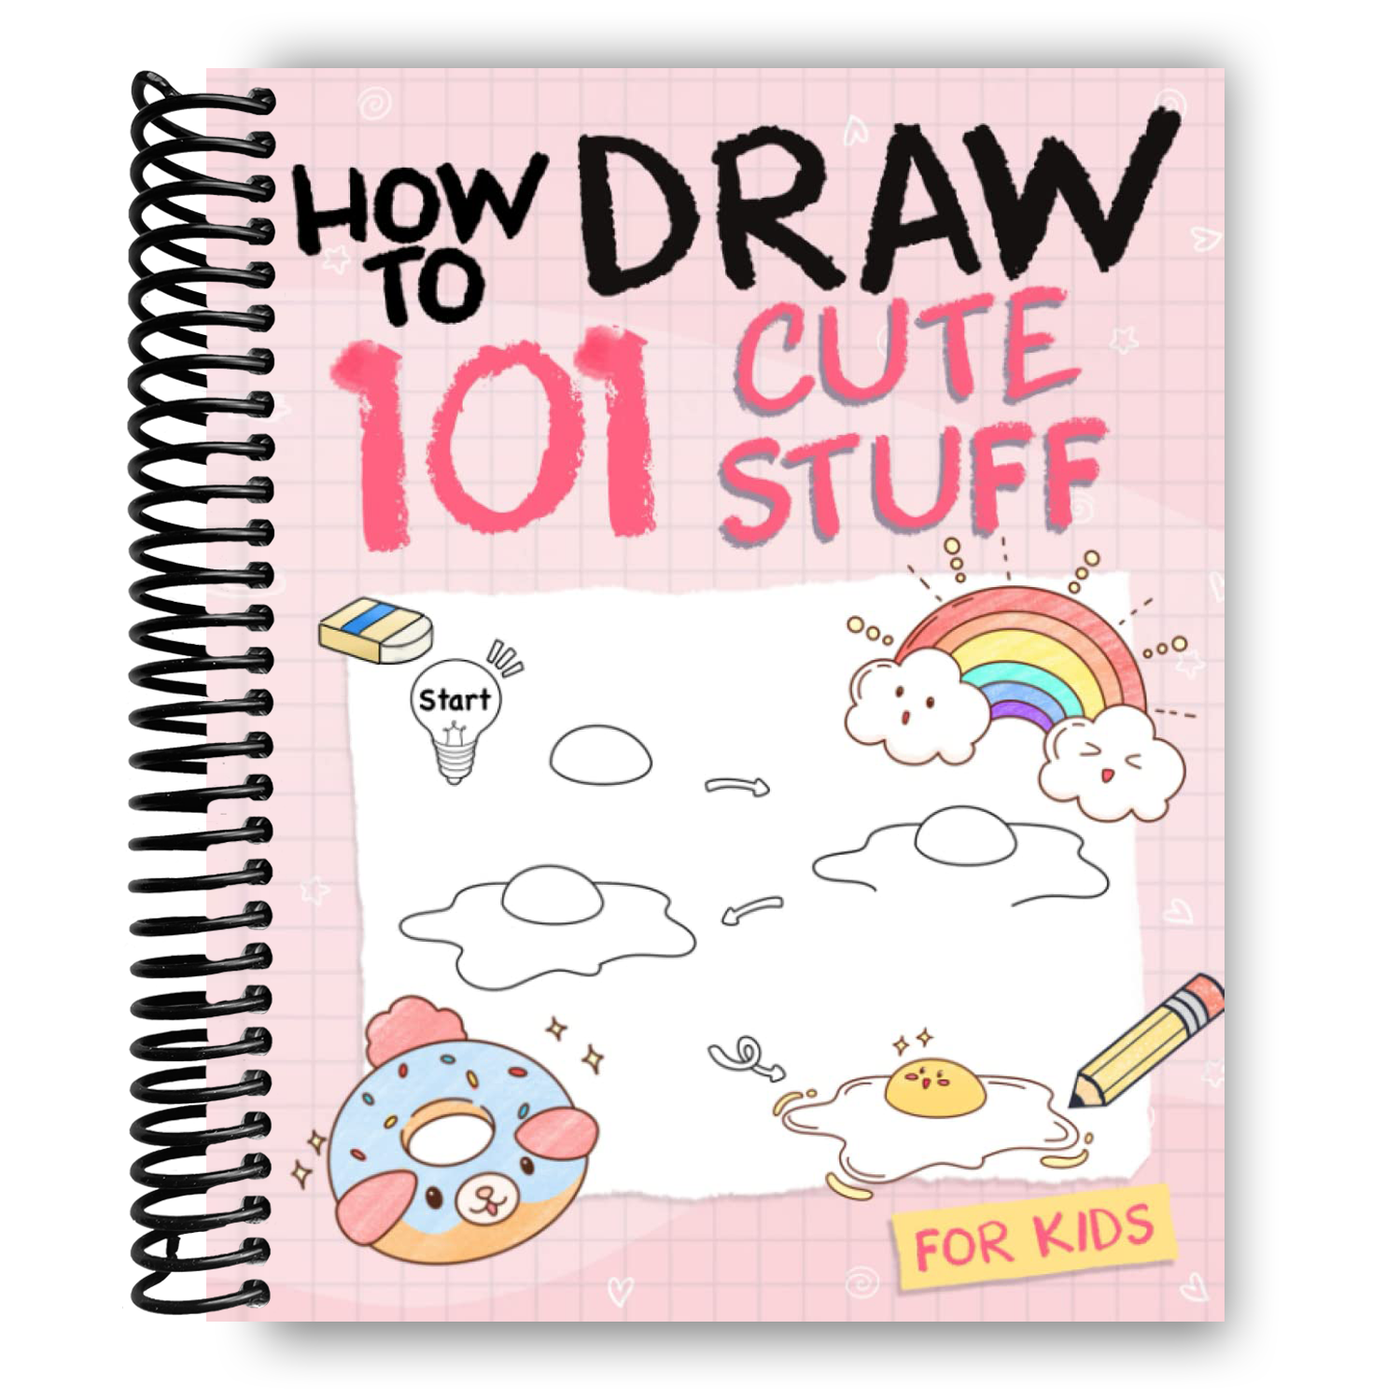 How To Draw 101 Cute Stuff For Kids: Simple and Easy Step-by-Step Guide Book to Draw Everything like Animals, Gift, Avocado and more with Cute Style (Spiral Bound)